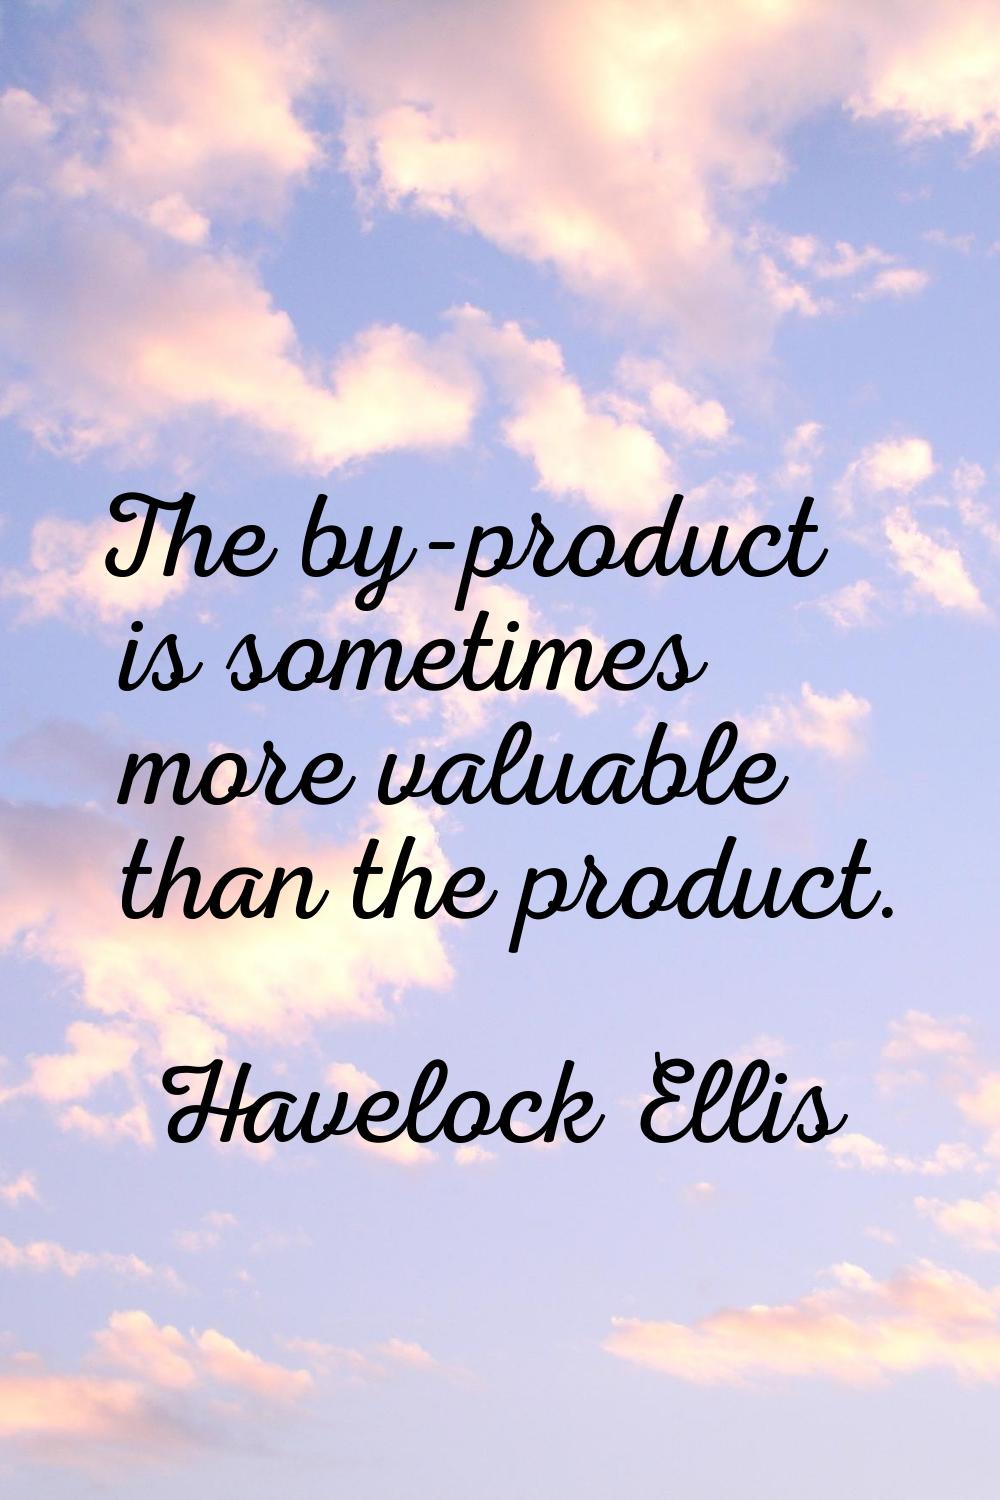 The by-product is sometimes more valuable than the product.